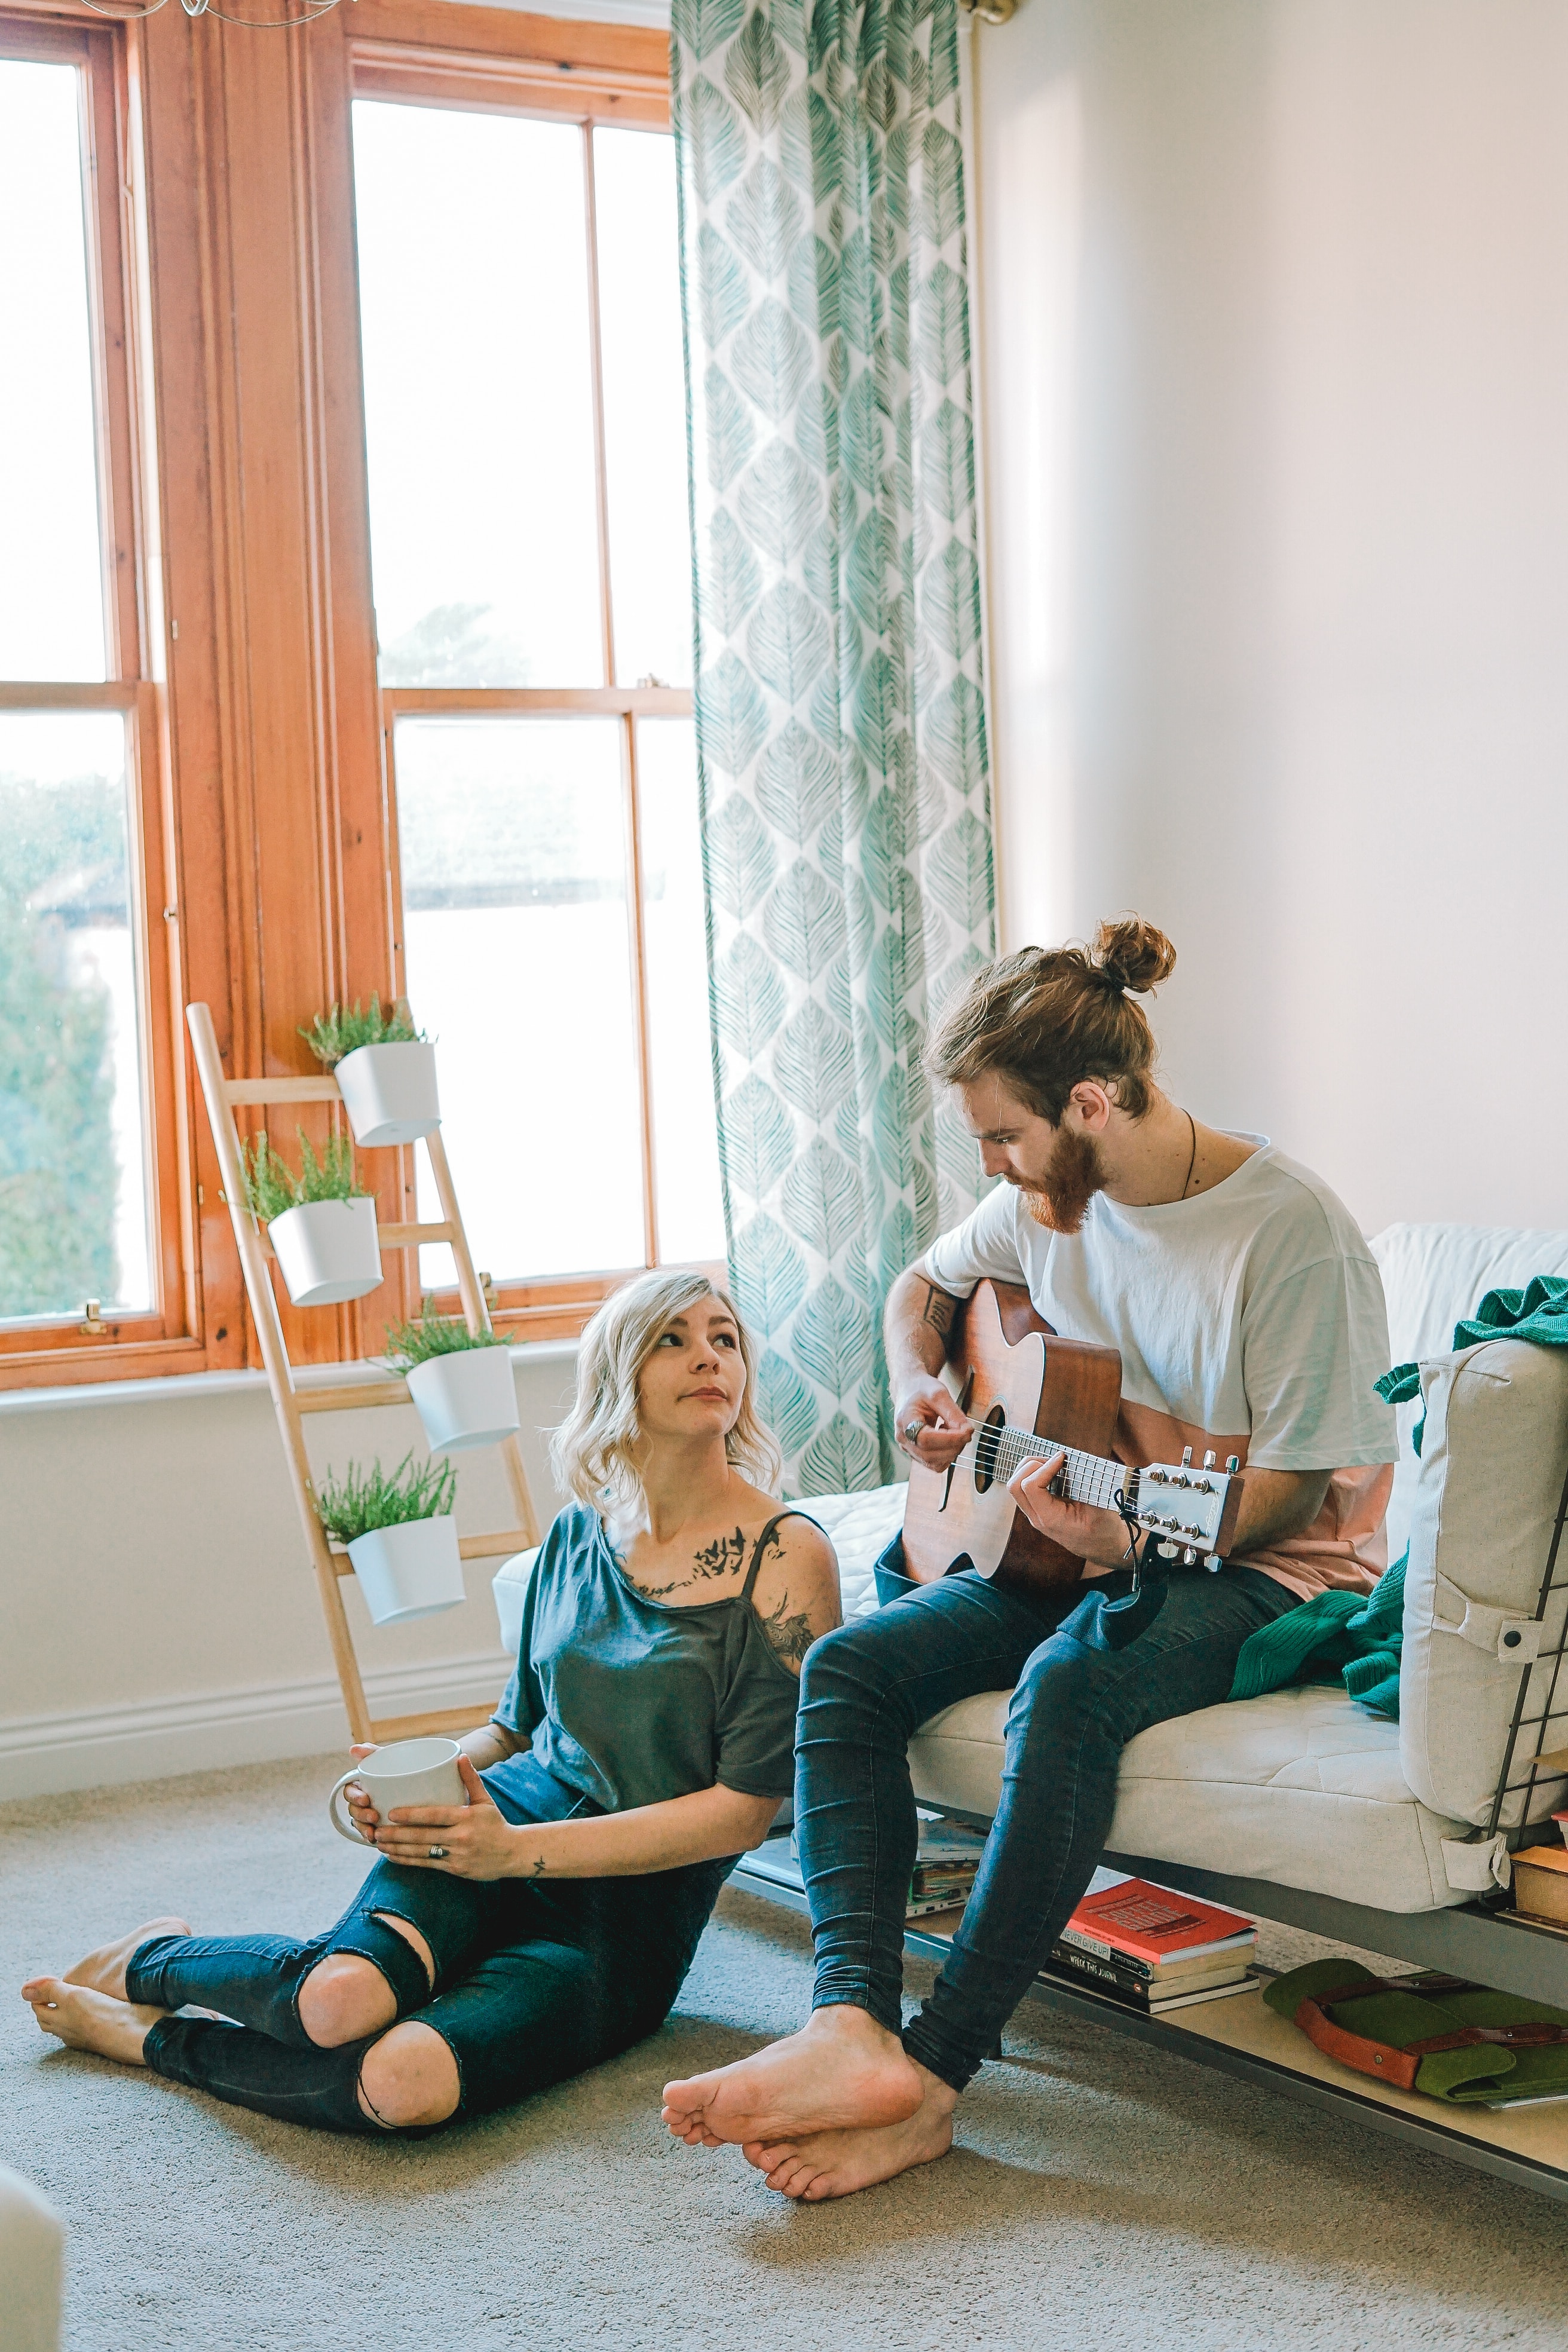 A couple sitting in a room with the man playing guitar. | Source: Unsplash